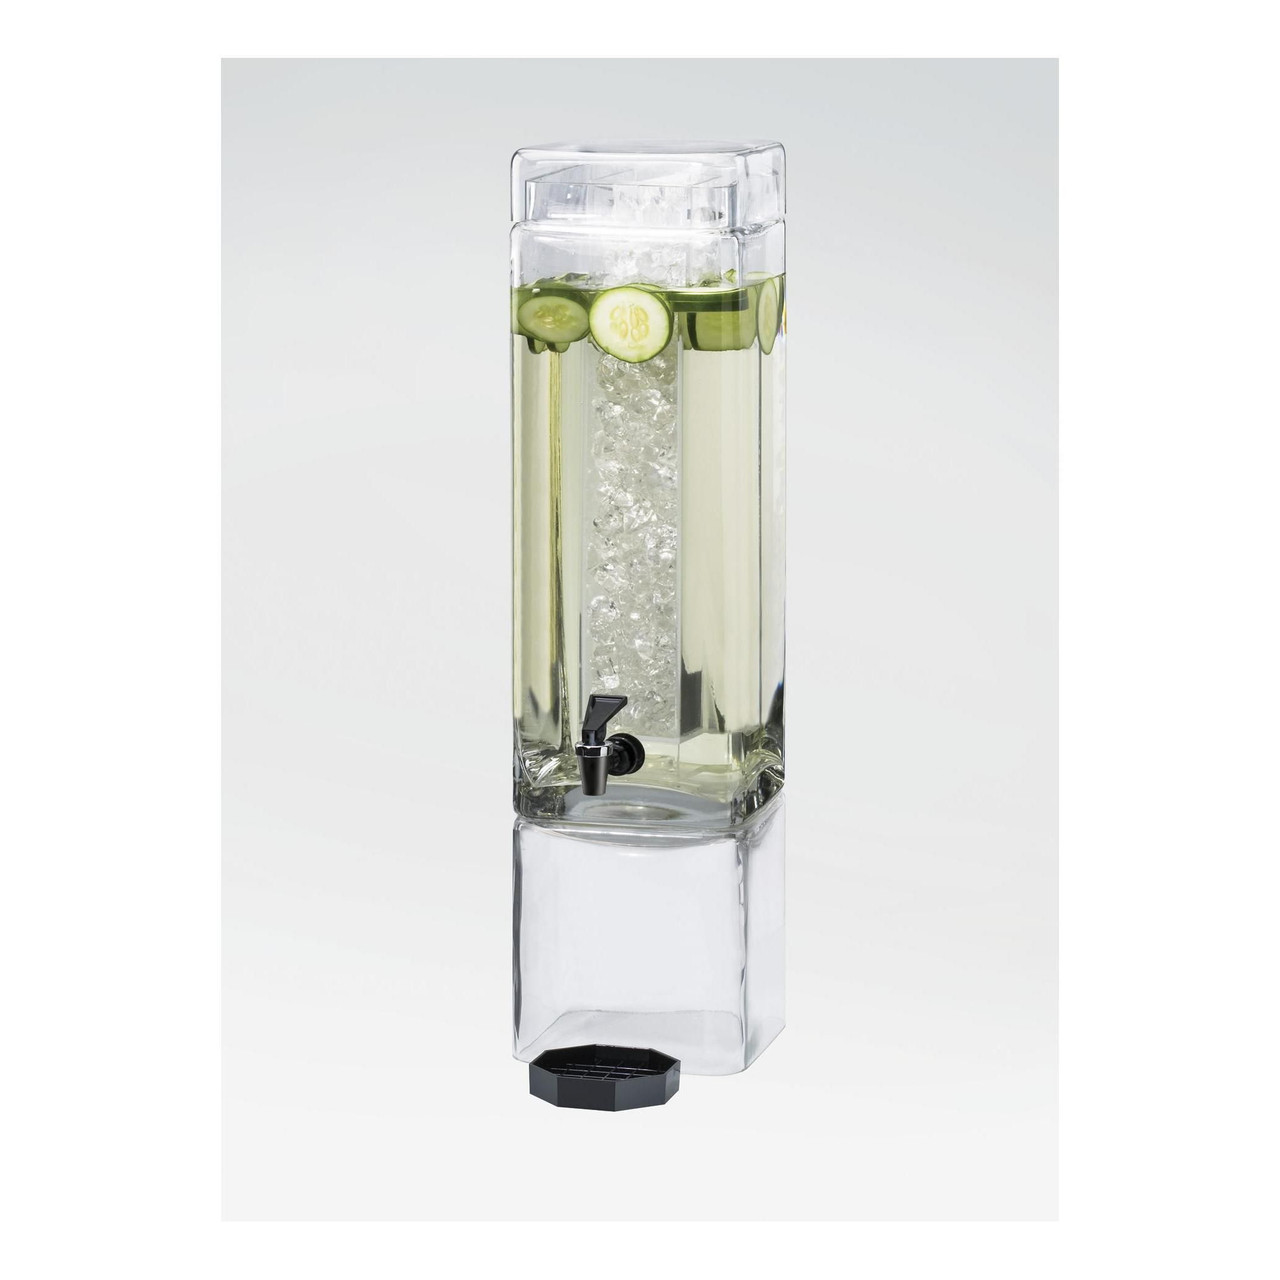 Cal-Mil 3 gal Beverage Dispenser with Ice Tube - Acrylic Container, Clear Base - Chicken Pieces